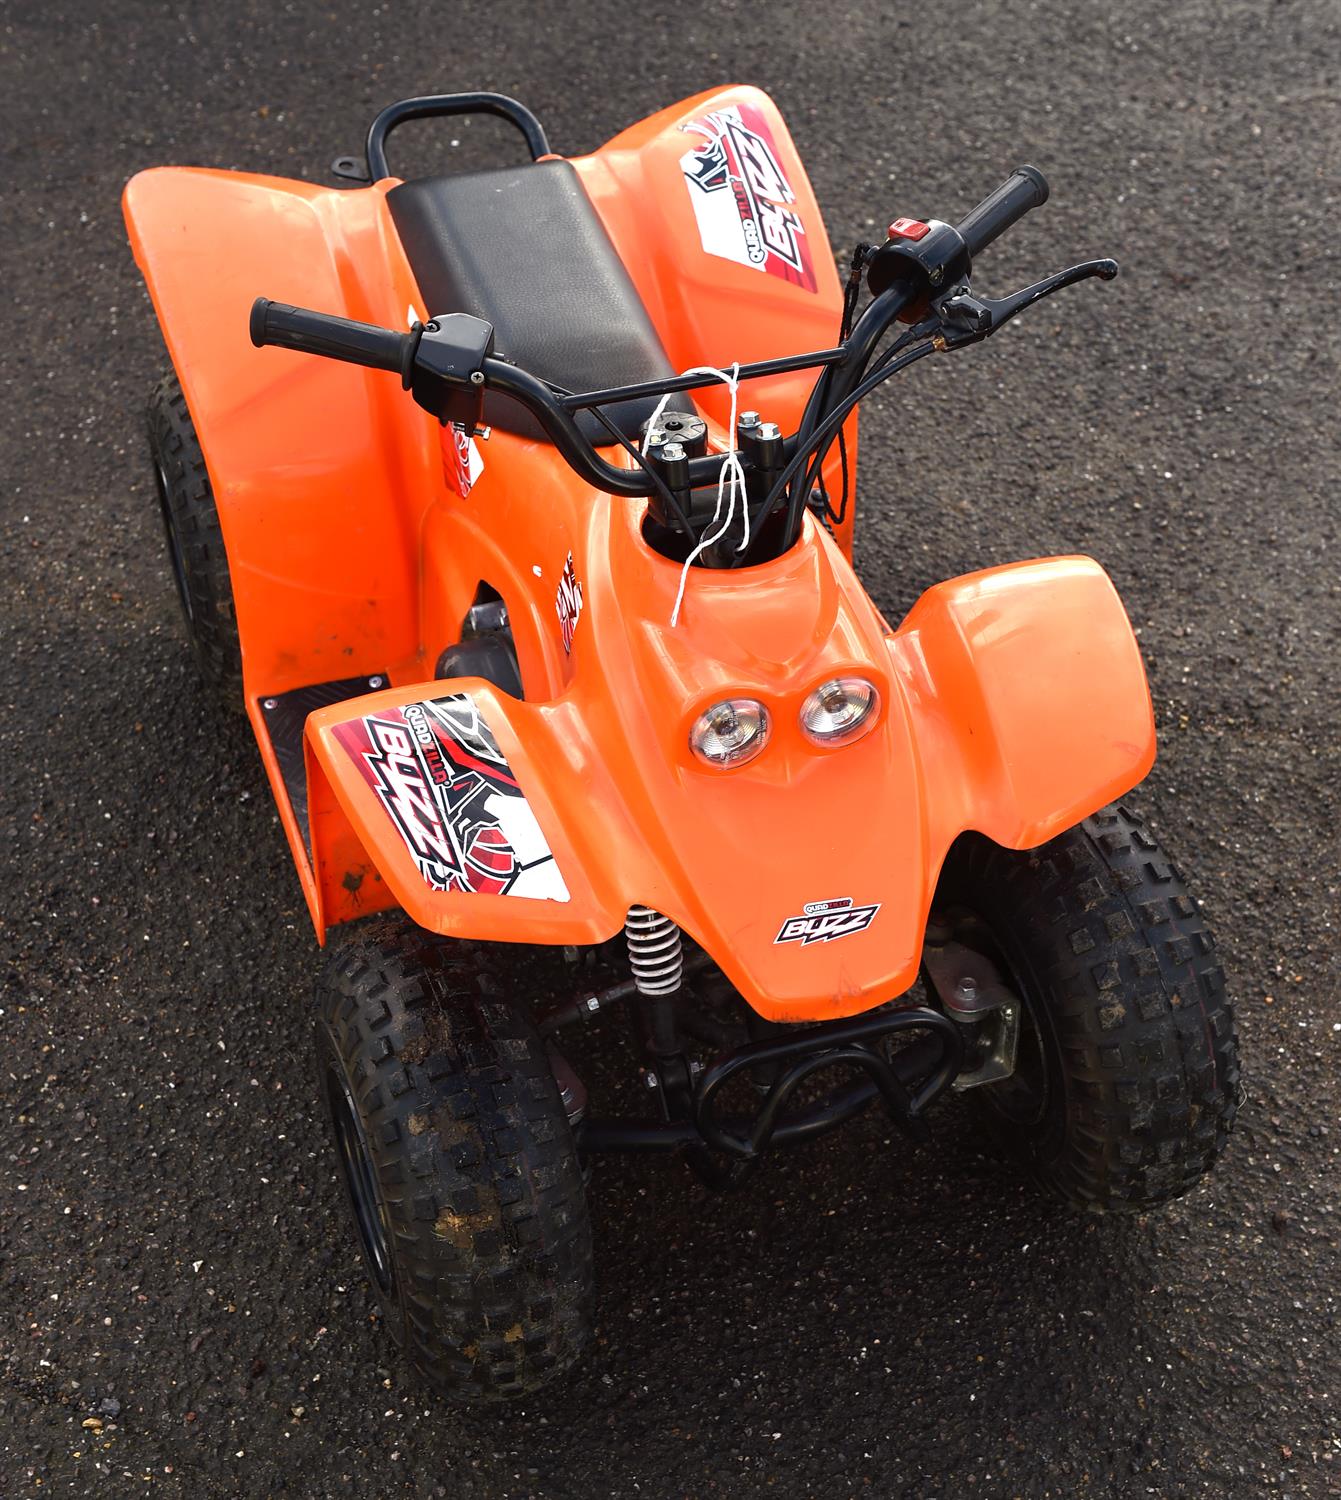 Buzz Quadzilla 50cc Quad bike. New battery fitted. Starts and runs well. A great first quad bike - Image 5 of 7